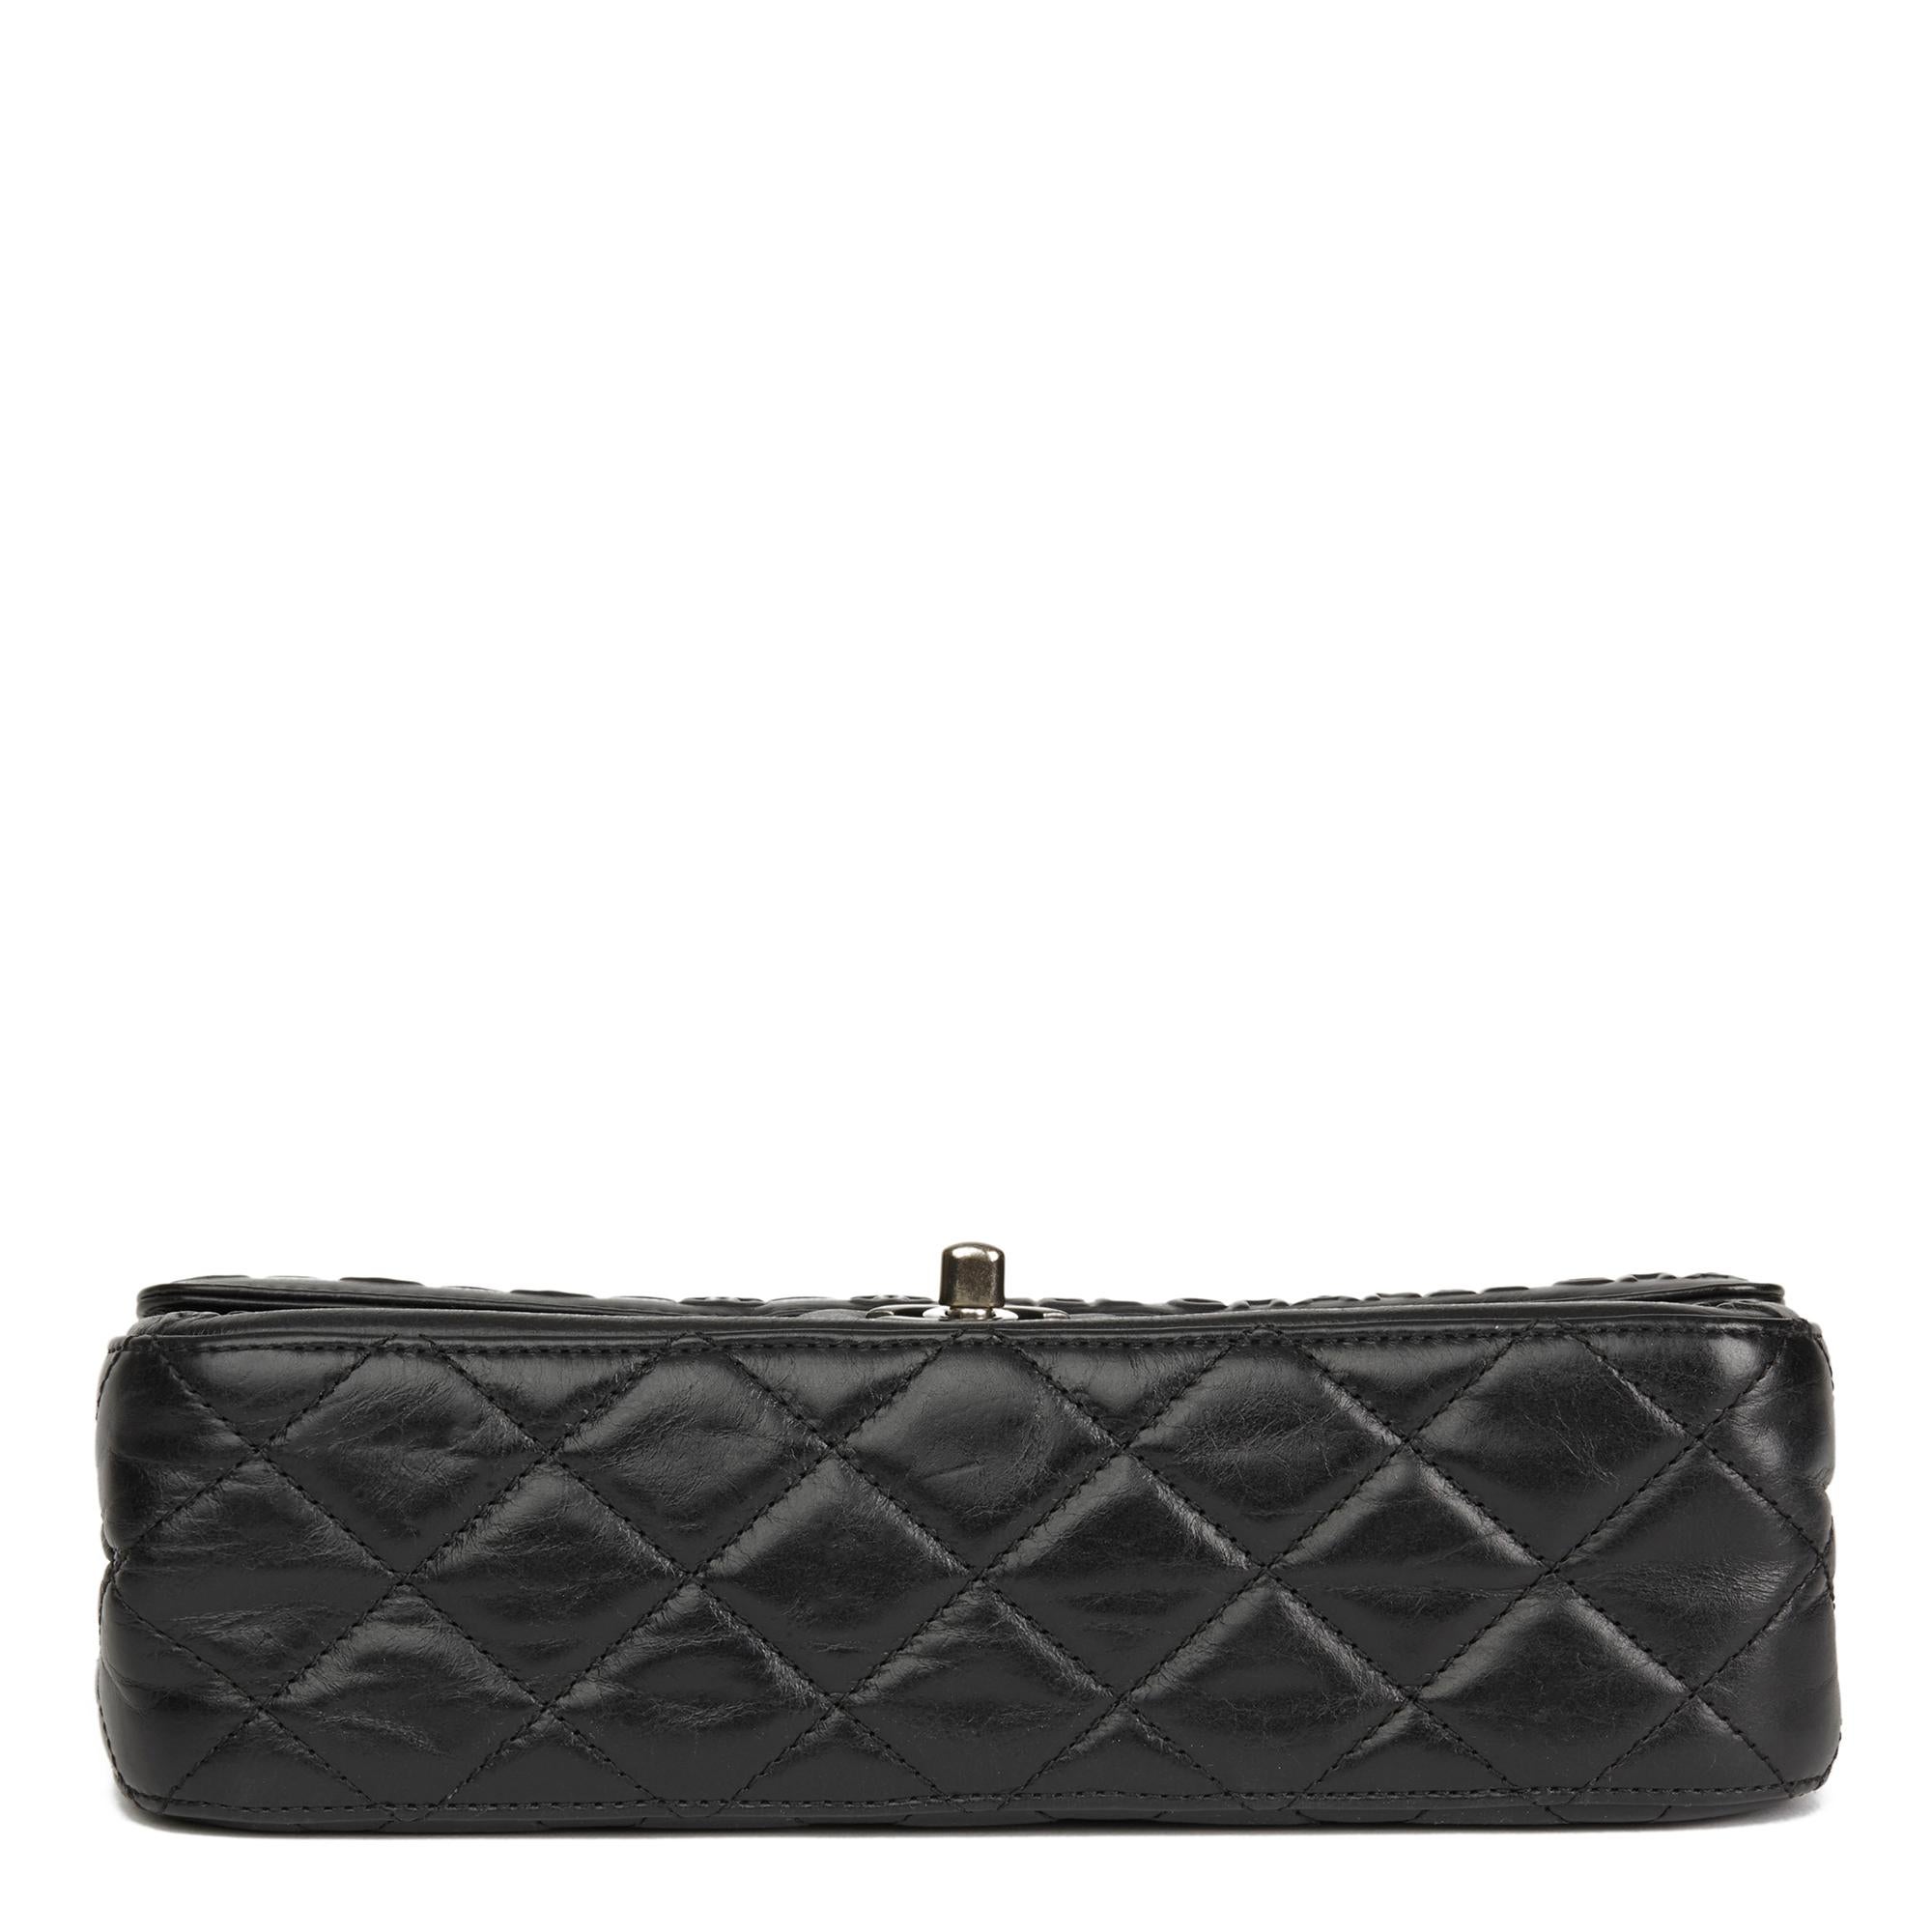 2014 Chanel Black Embossed & Quilted Calfskin Leather Paris-Dallas Classic Singl 1